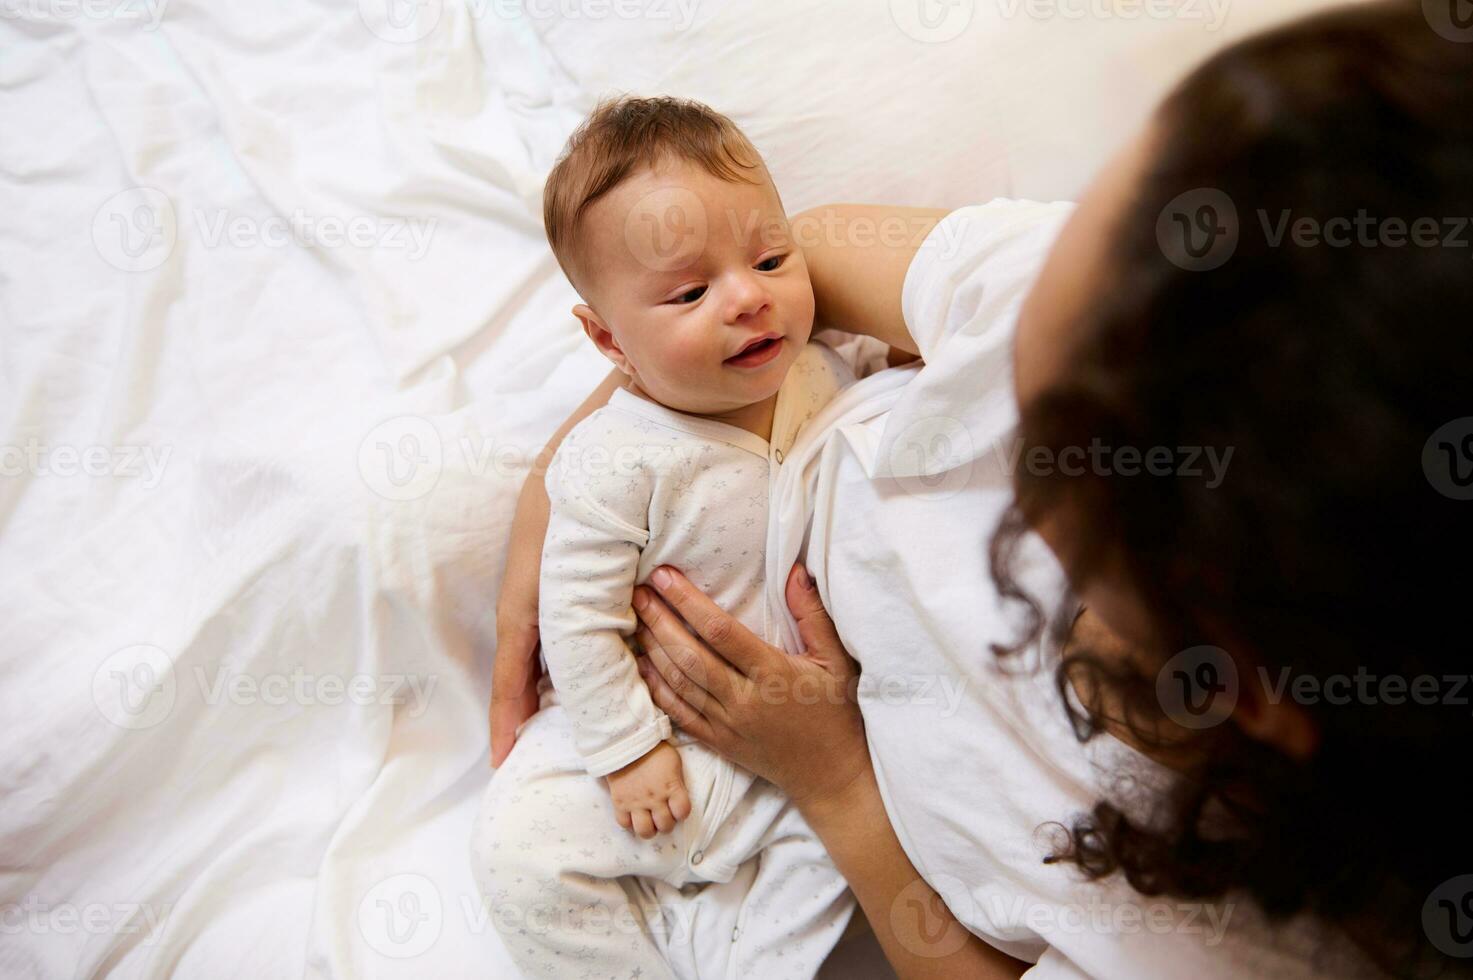 View from above of Caucasian child, adorable newborn baby in the hands of a woman, happy loving mother gently holding, embracing, stroking and hugging her baby boy. Infancy and maternity concept photo